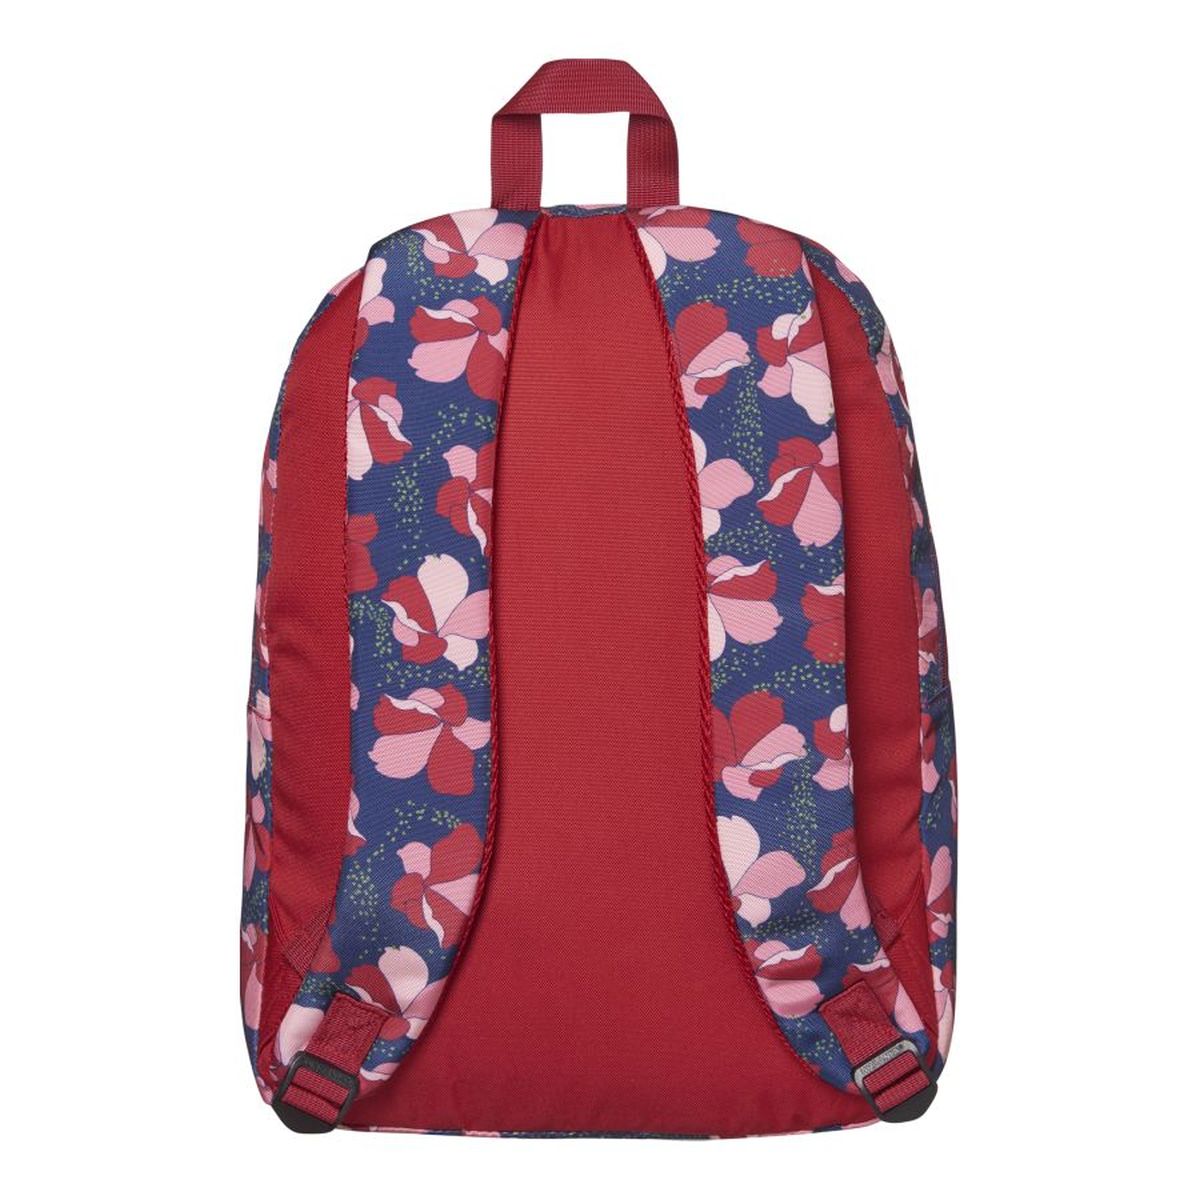 Backpack Poitou Trends Floral Blossom